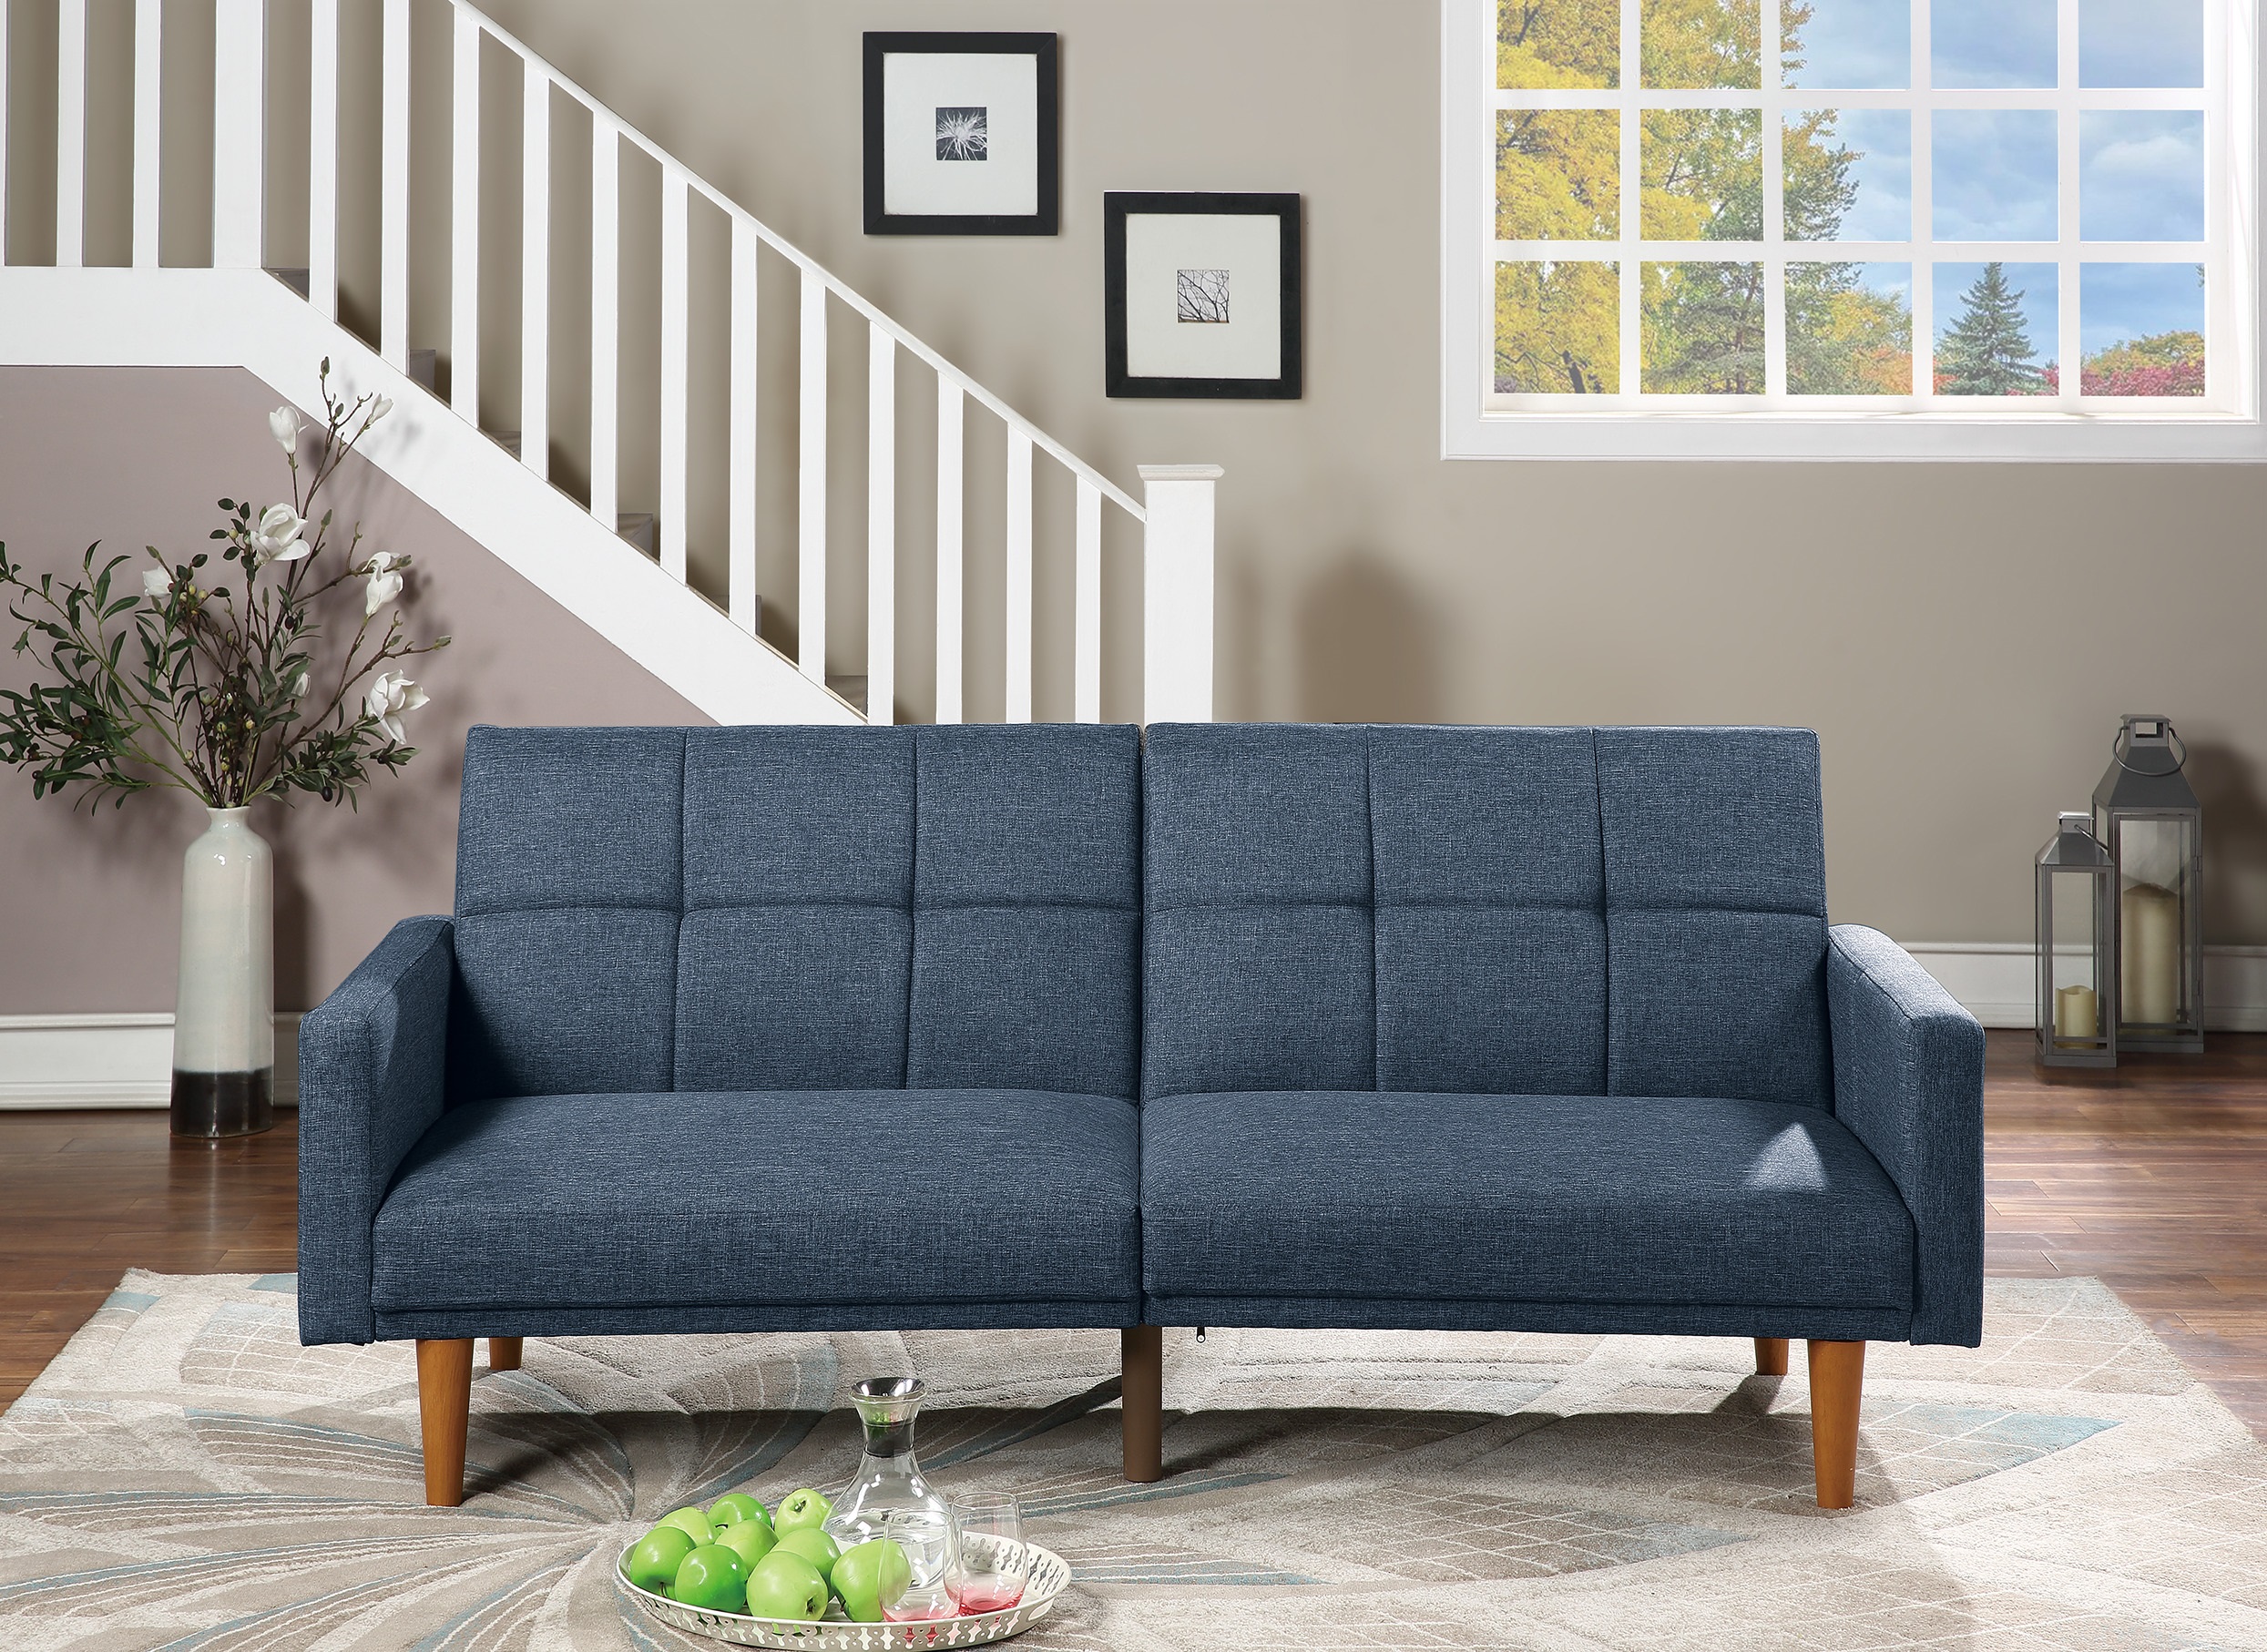 Transitional Look Living Room Sofa Couch Convertible Bed Navy Polyfiber 1pc Tufted Sofa Cushion Wooden Legs-Boyel Living